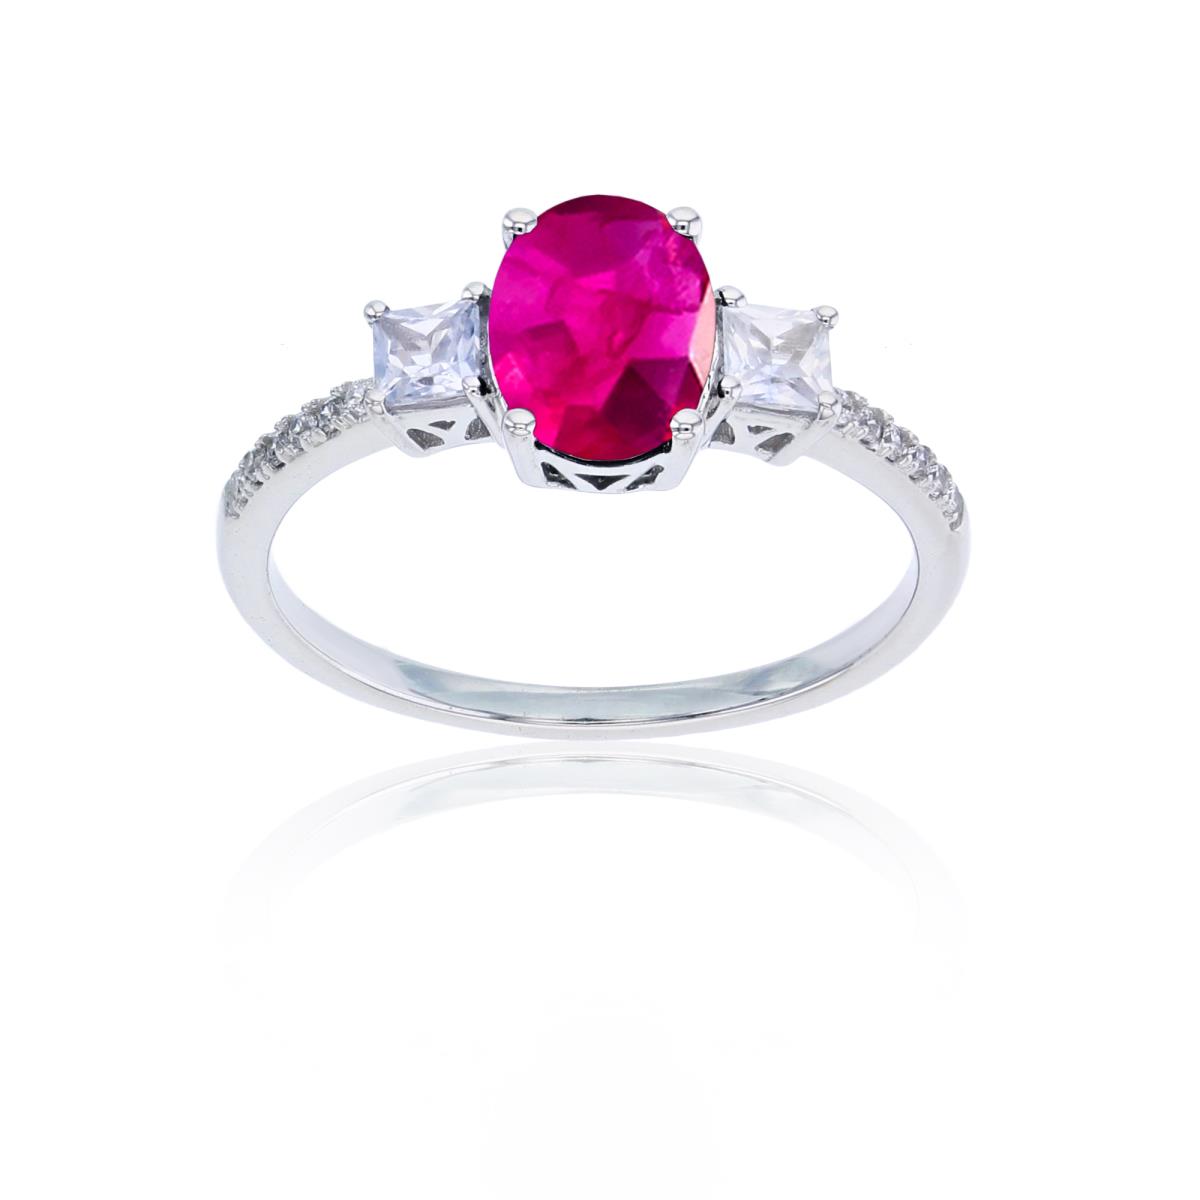 Sterling Silver Rhodium 8x6mm Ov Glass Filled Ruby & 3mm Square/Rnd Created White Sapphire Ring